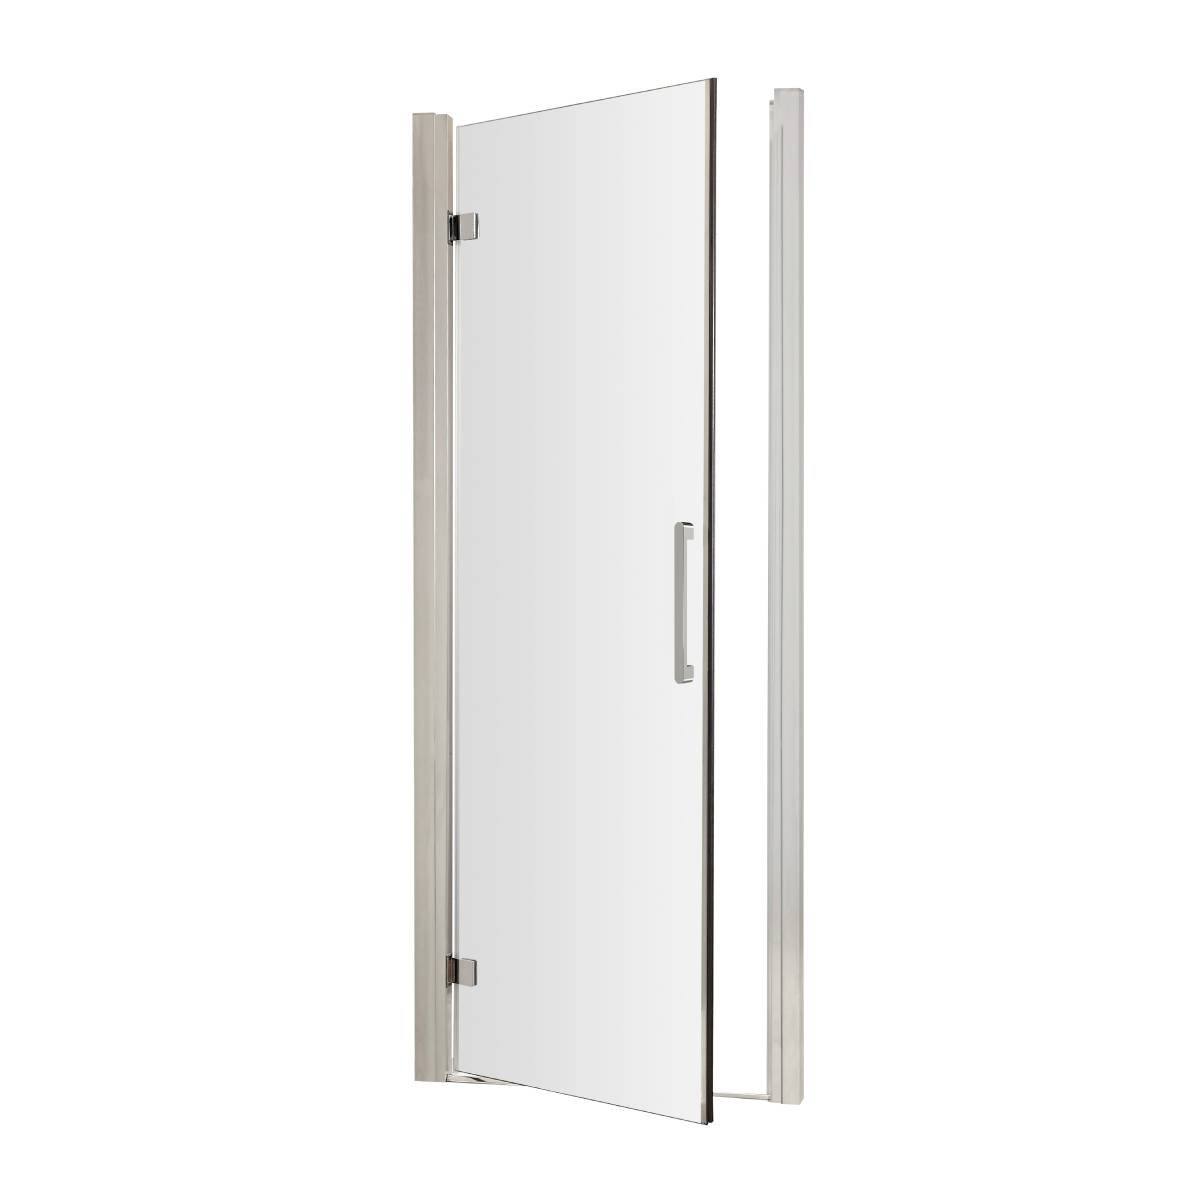 Hudson Reed Apex 700mm Hinged Shower Door with Round Handle MH70H4 (13369)